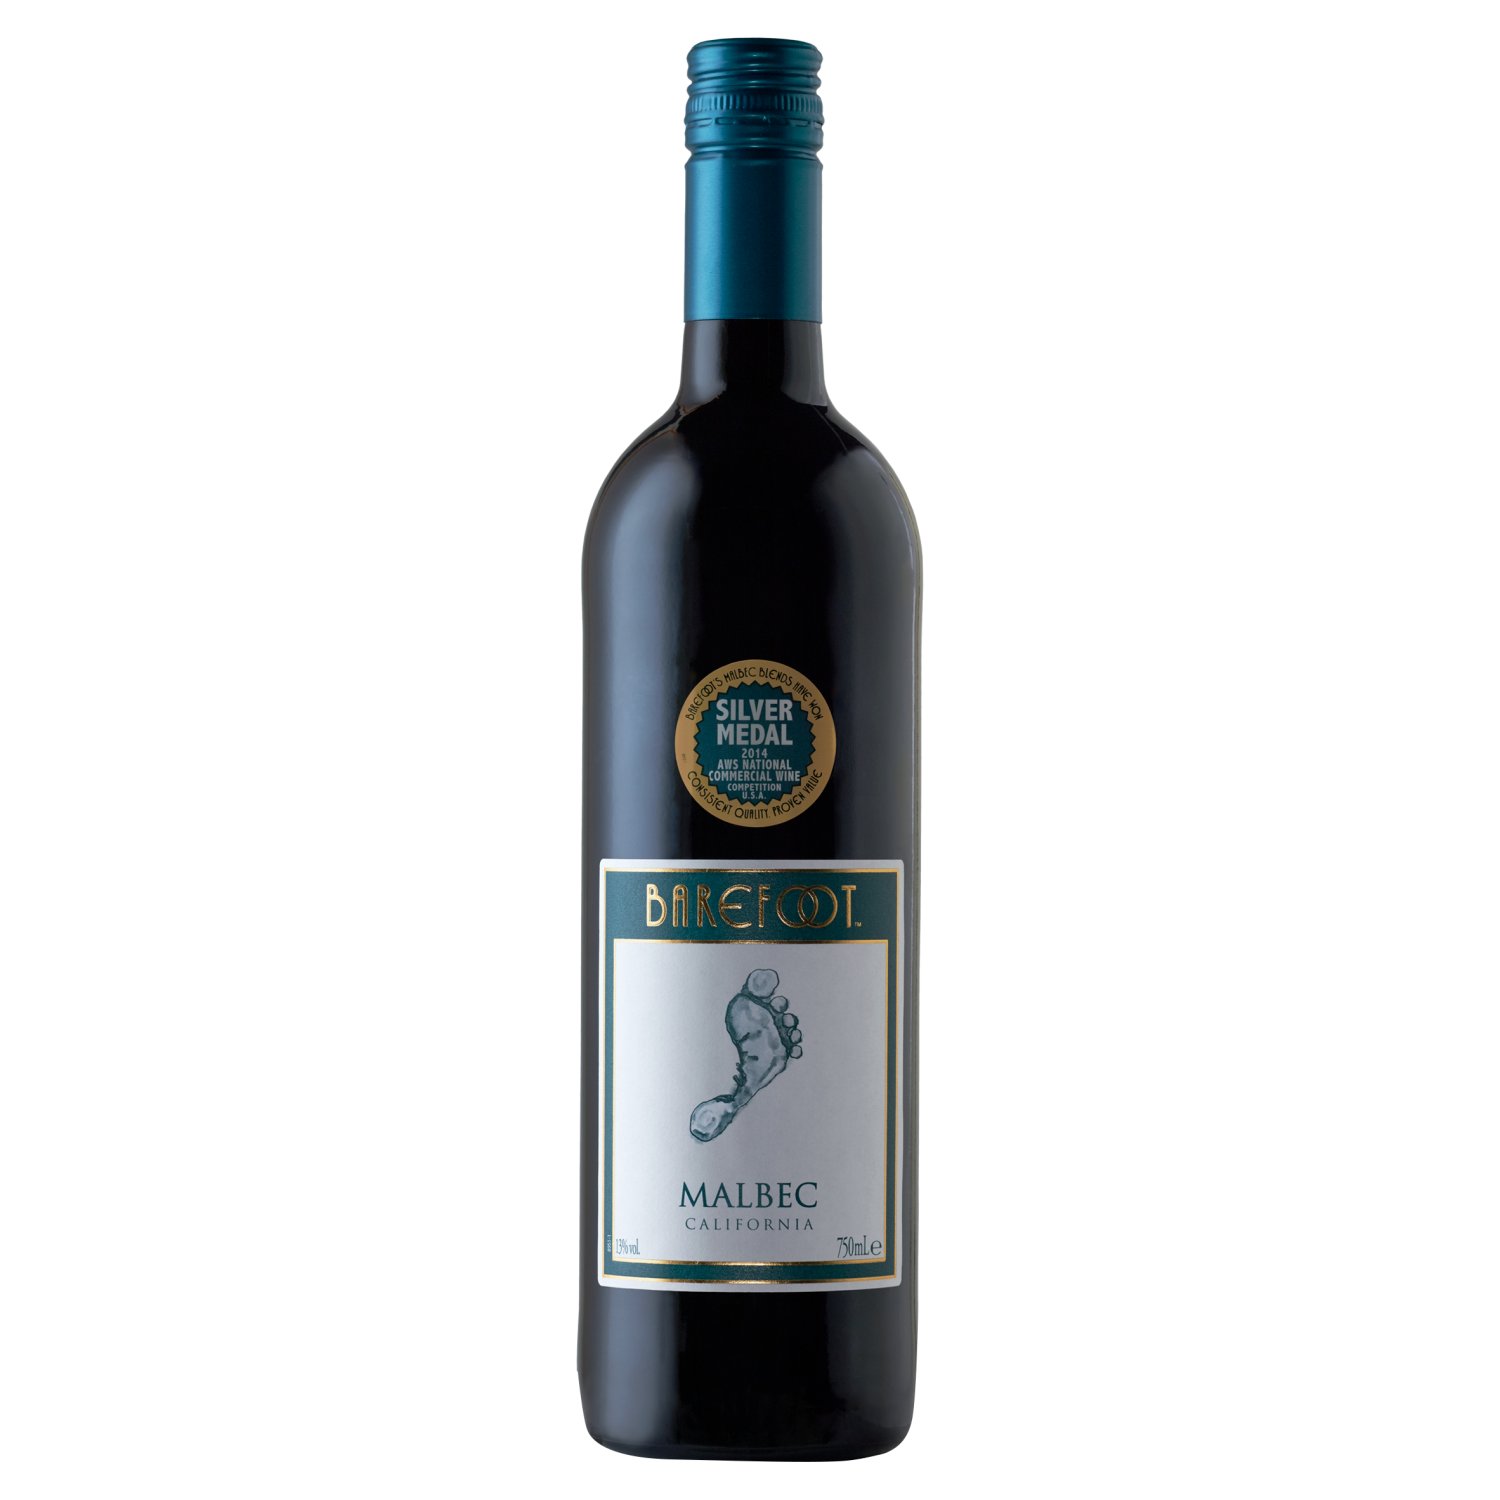 Barefoot Malbec is a luscious red wine with juicy flavours of blackberry, currant and vanilla with a smooth finish. Goes great with barbecued steak, spicy pulled pork or pizza!